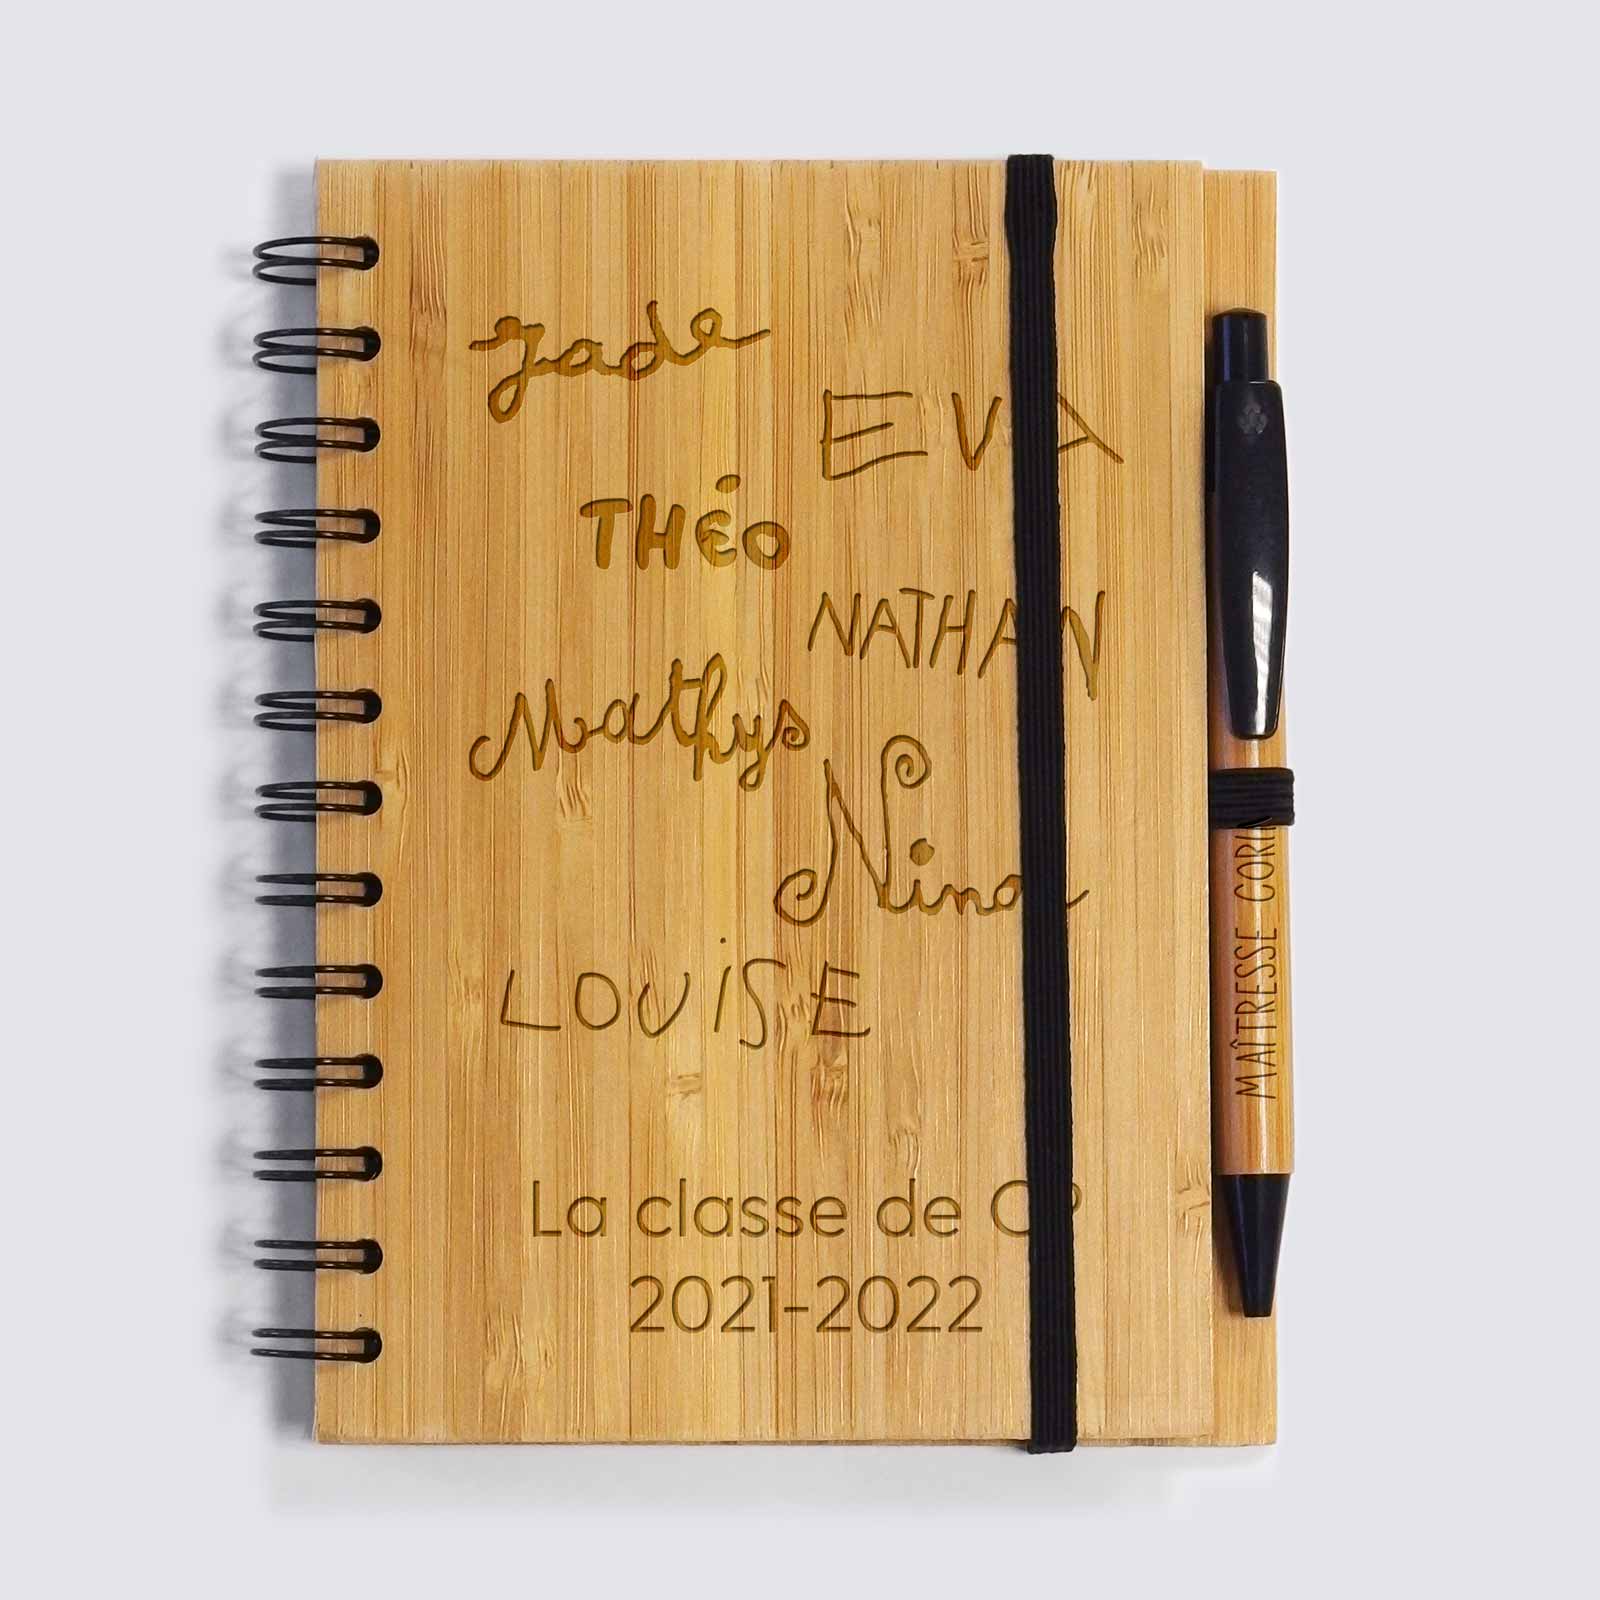 Personalised bamboo notebook and engraved pen - text